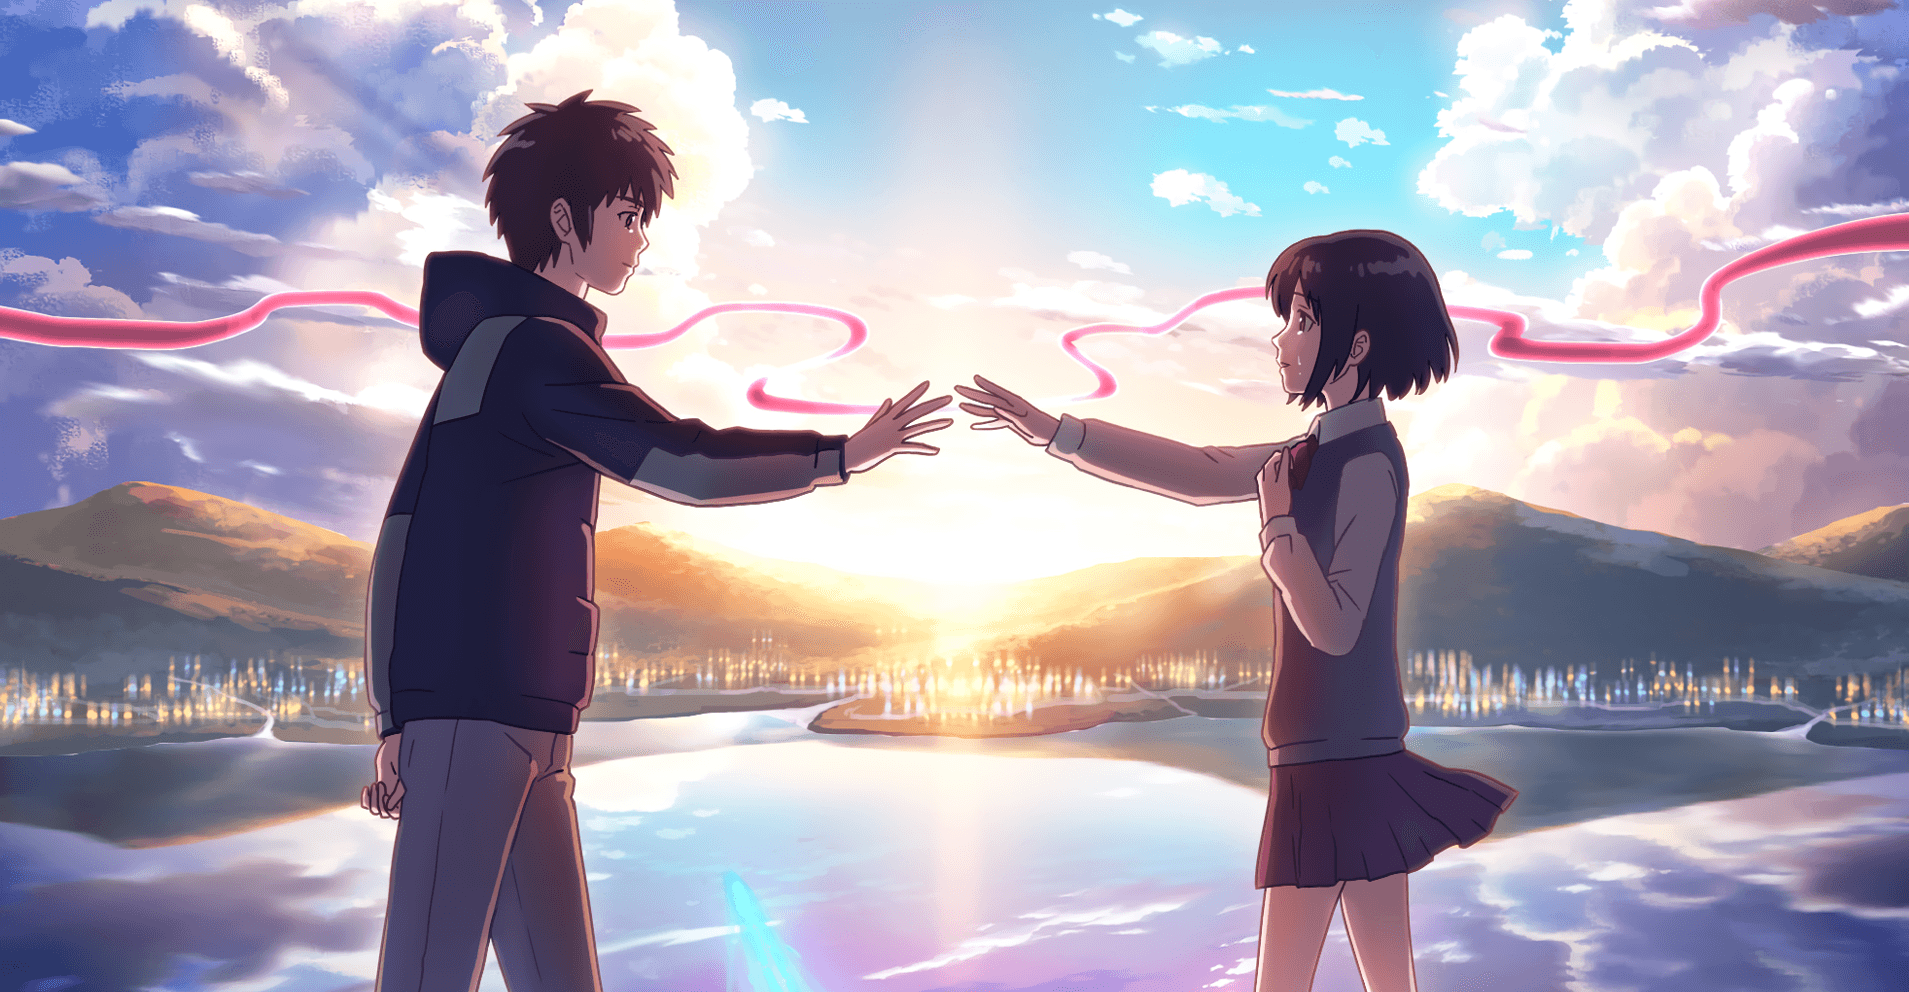 15 Reasons You Should Watch 'Your Name' Even If You Don't Like Anime